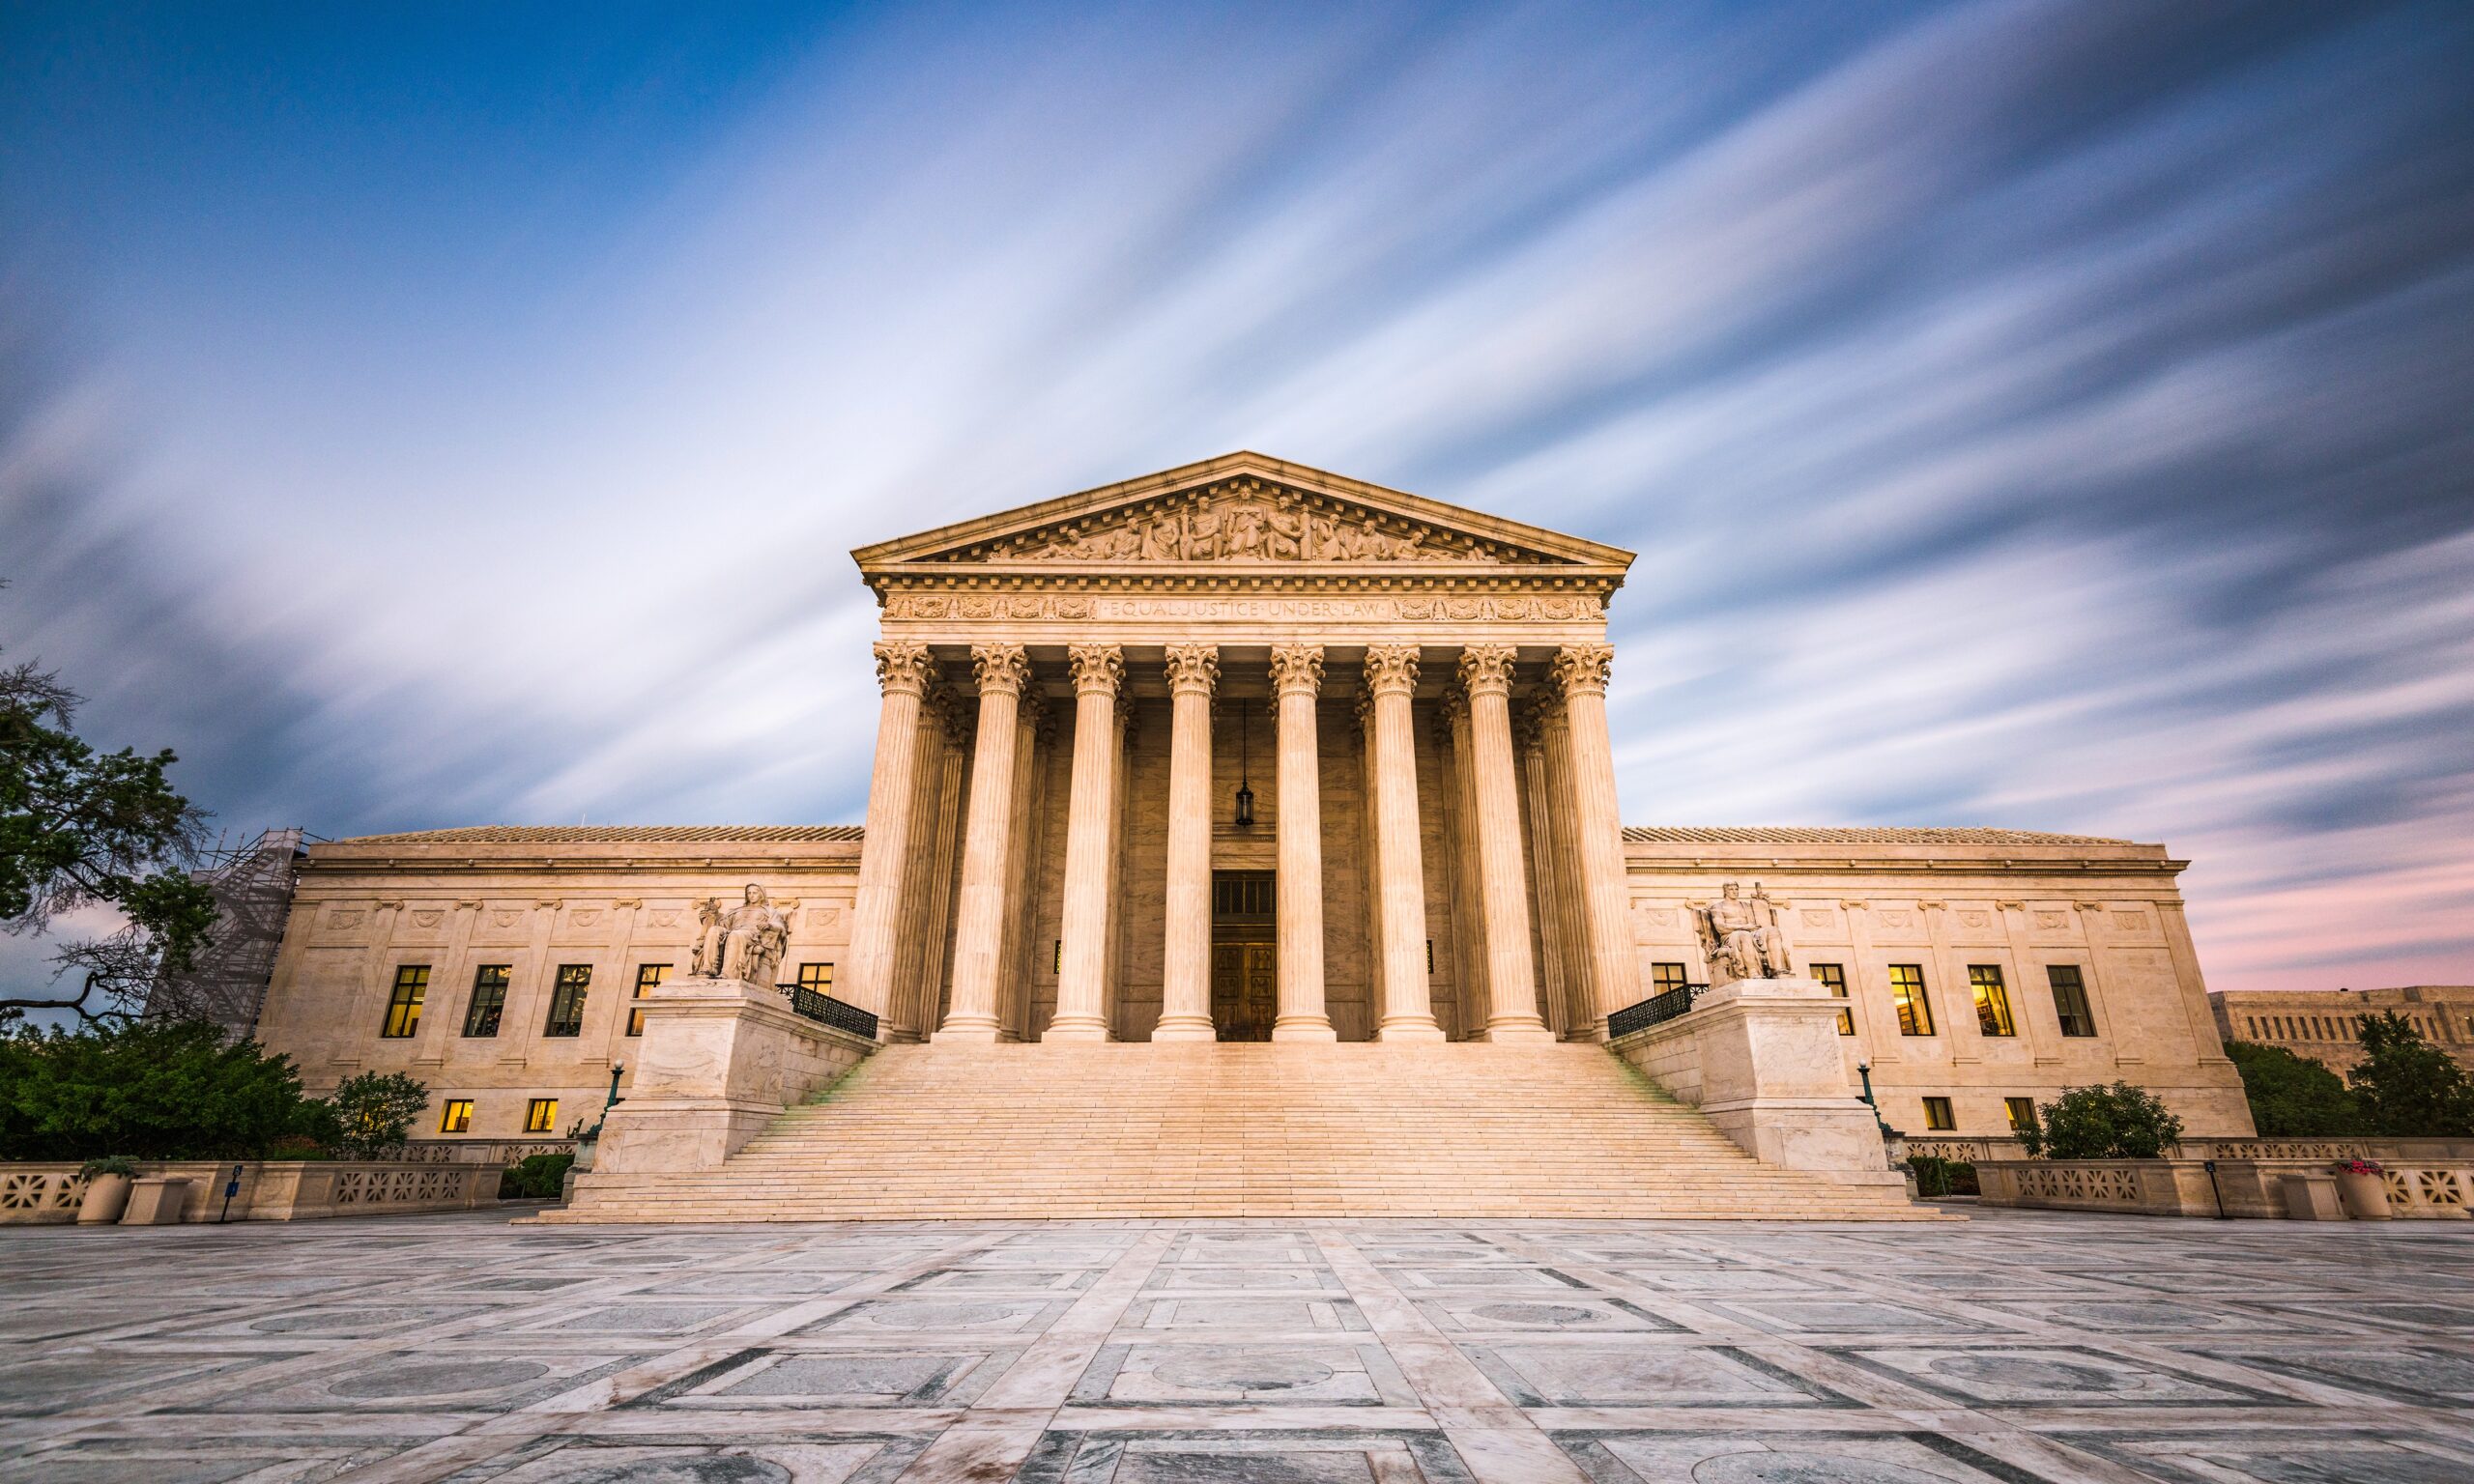 A photograph of the United States Supreme Court Building in Washington DC, USA. The building is white and has columns in the front. The sky is striped with clouds.